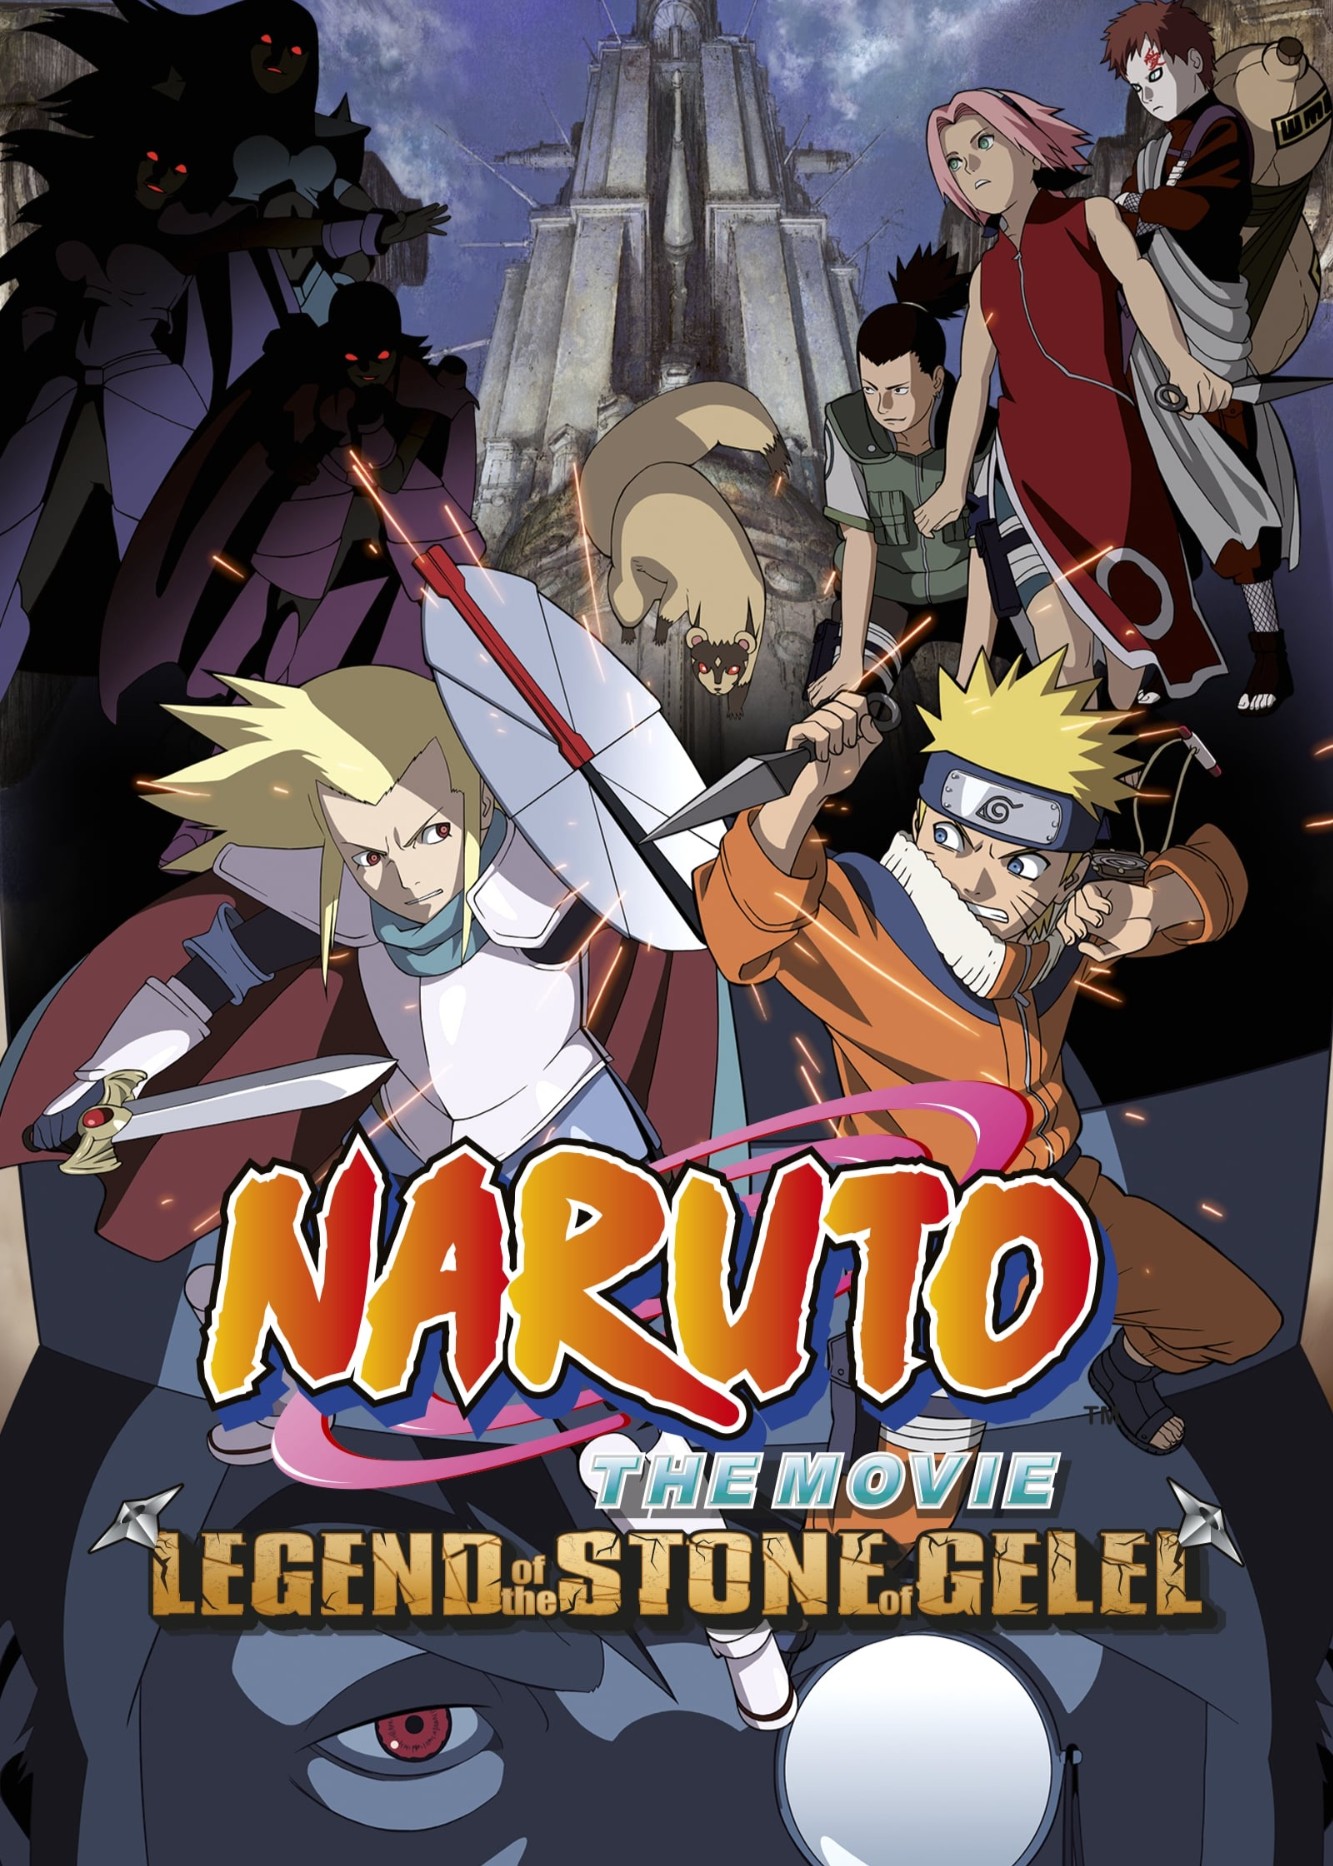 Naruto the Movie 2: Legend of the Stone of Gelel 2005